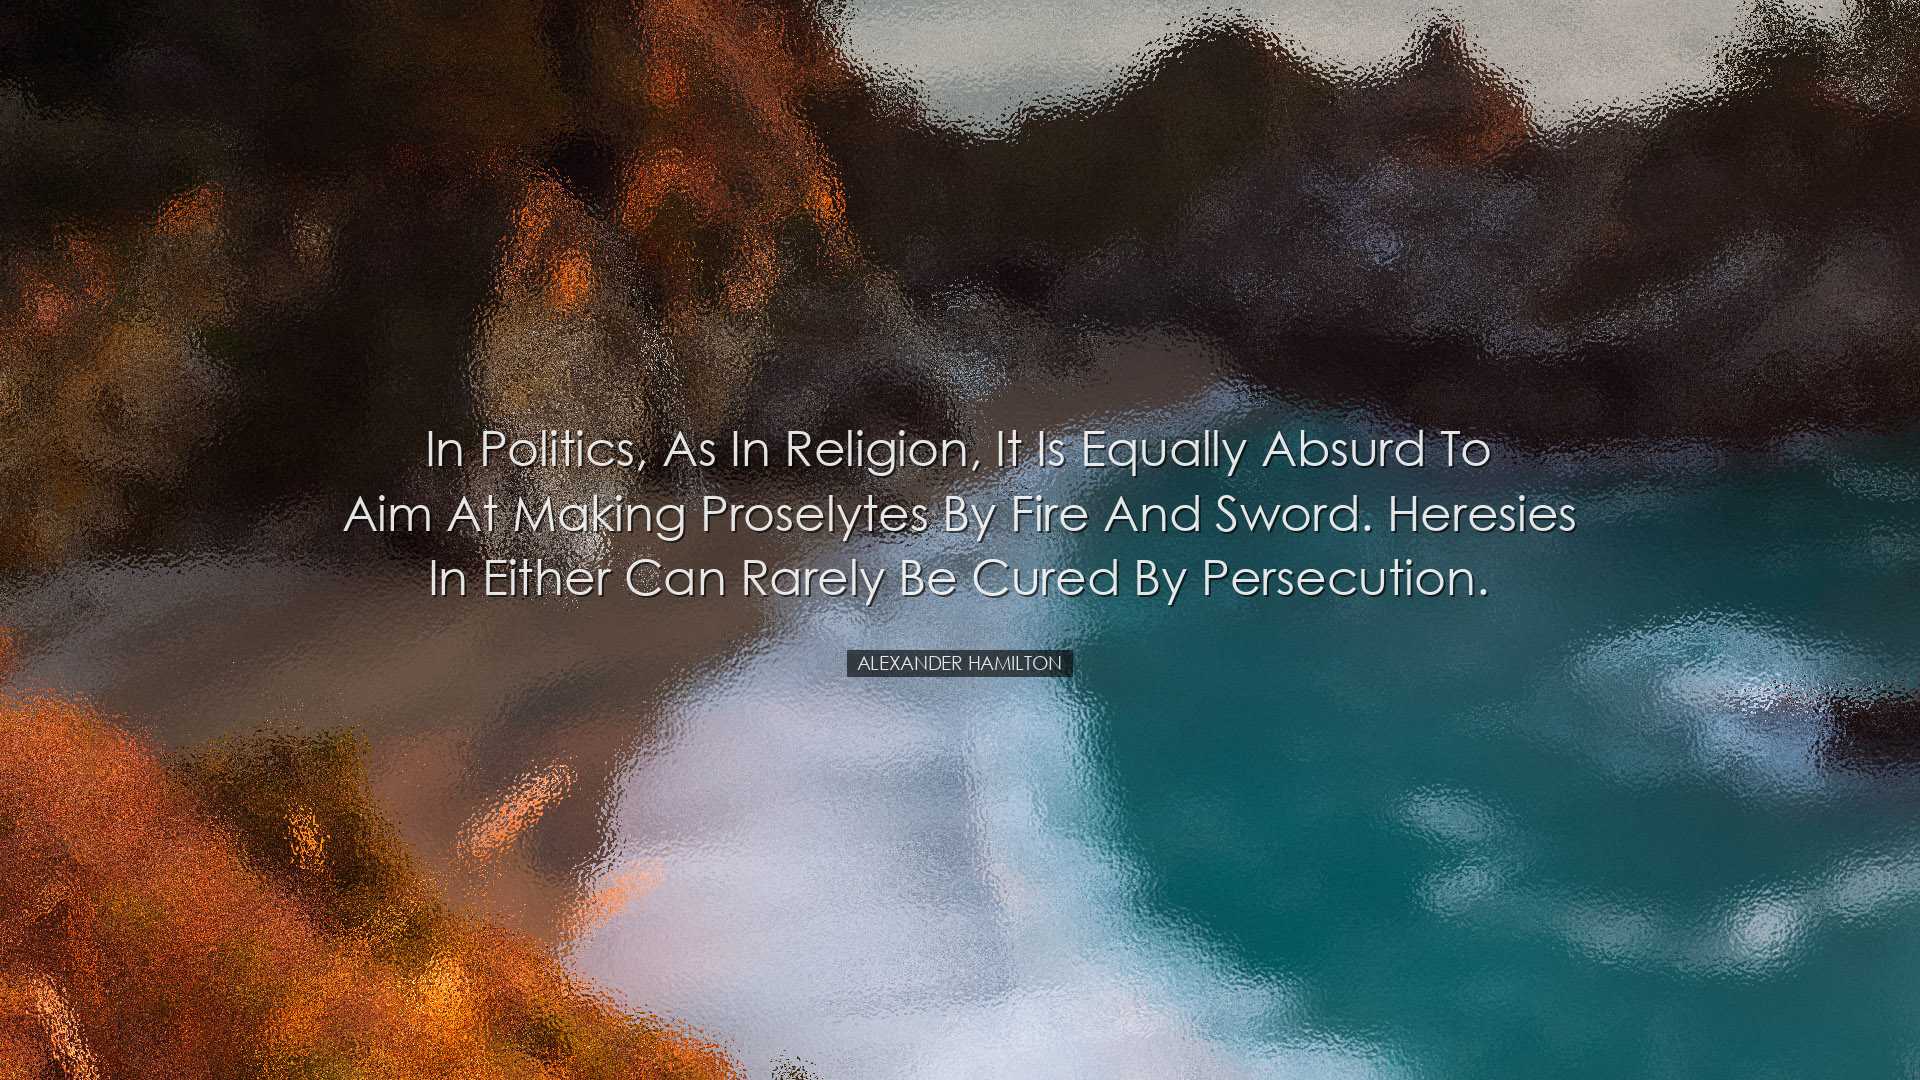 In politics, as in religion, it is equally absurd to aim at making